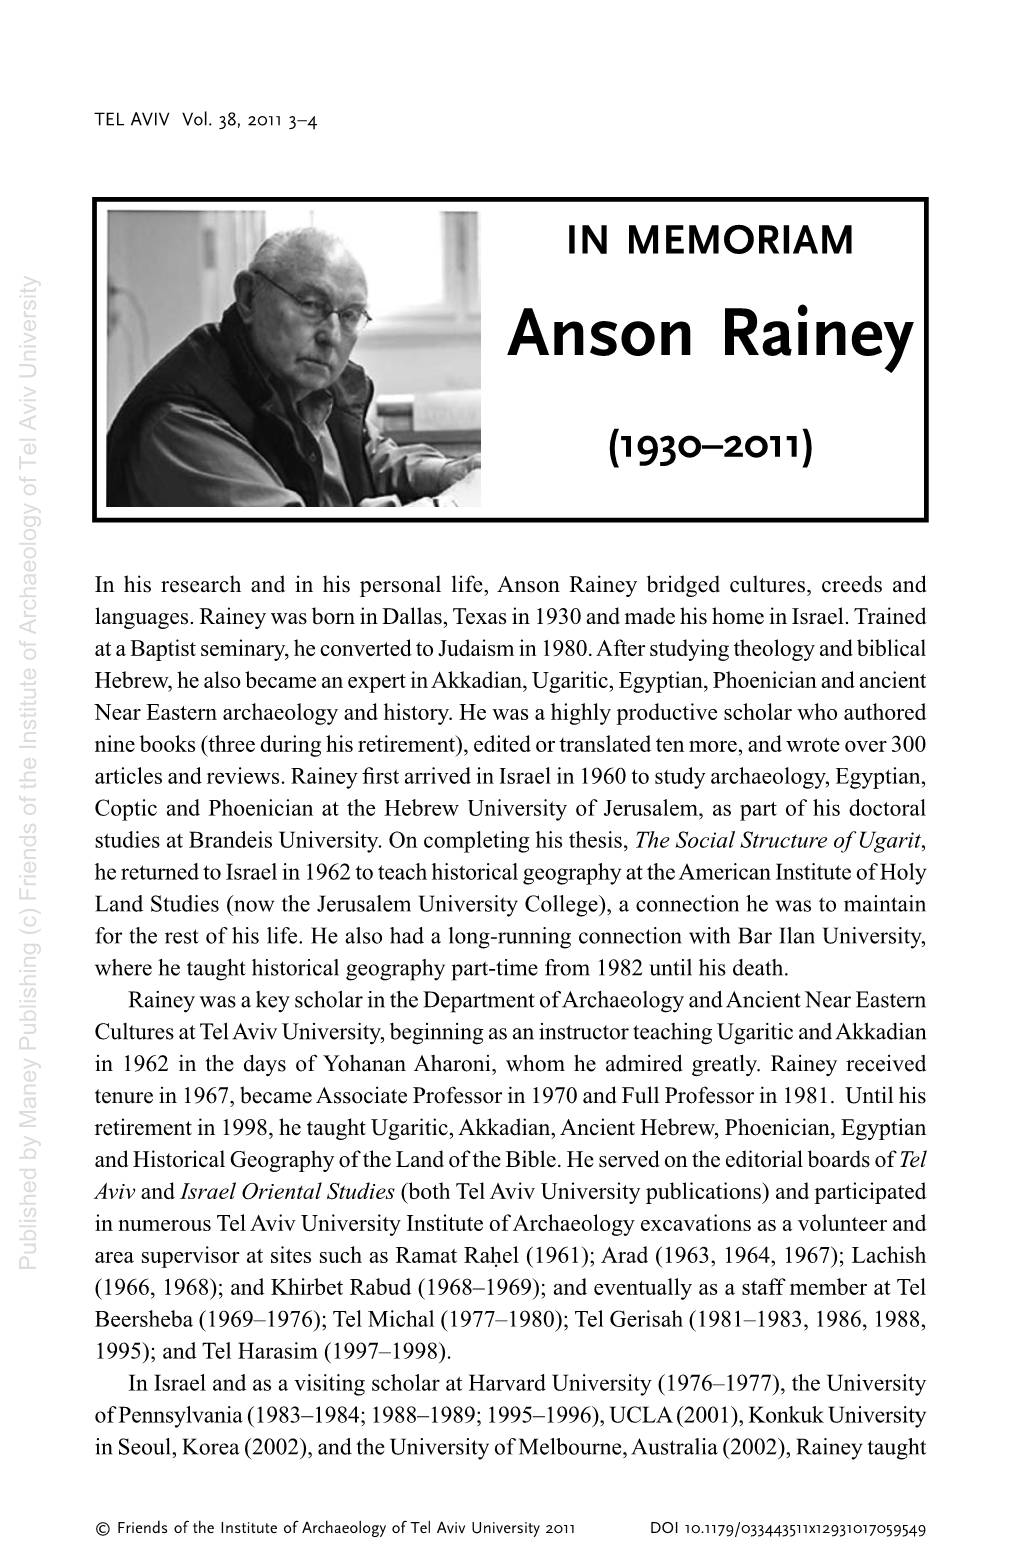 Anson Rainey Theology Was Life, Born and in Biblicaldallas, Personal Texas His in 1930 in and Made and His Home in Research Israel